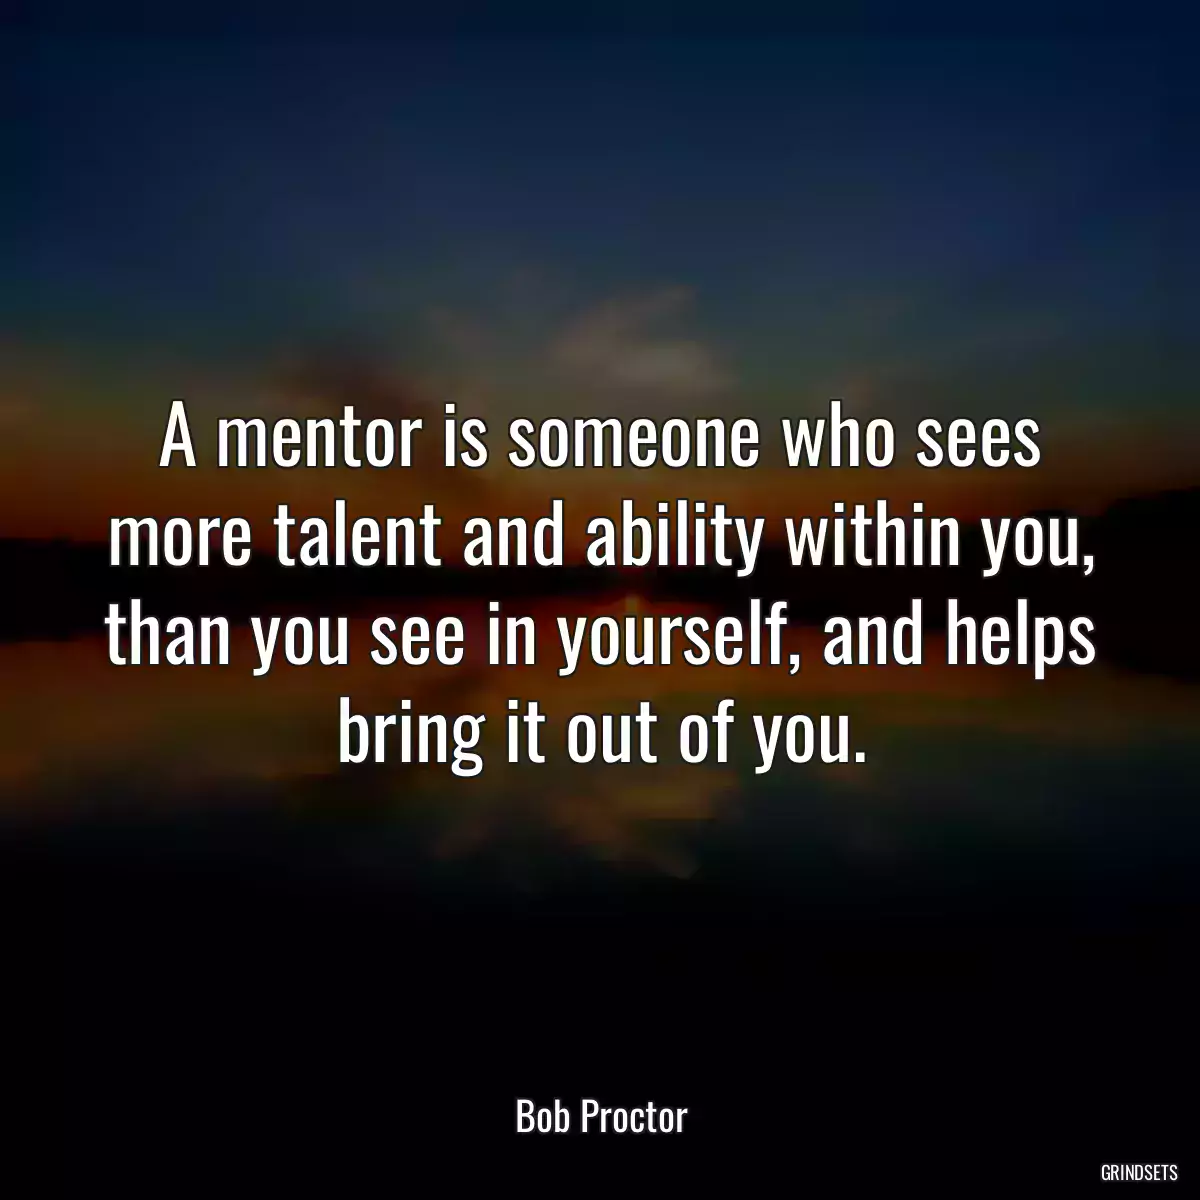 A mentor is someone who sees more talent and ability within you, than you see in yourself, and helps bring it out of you.